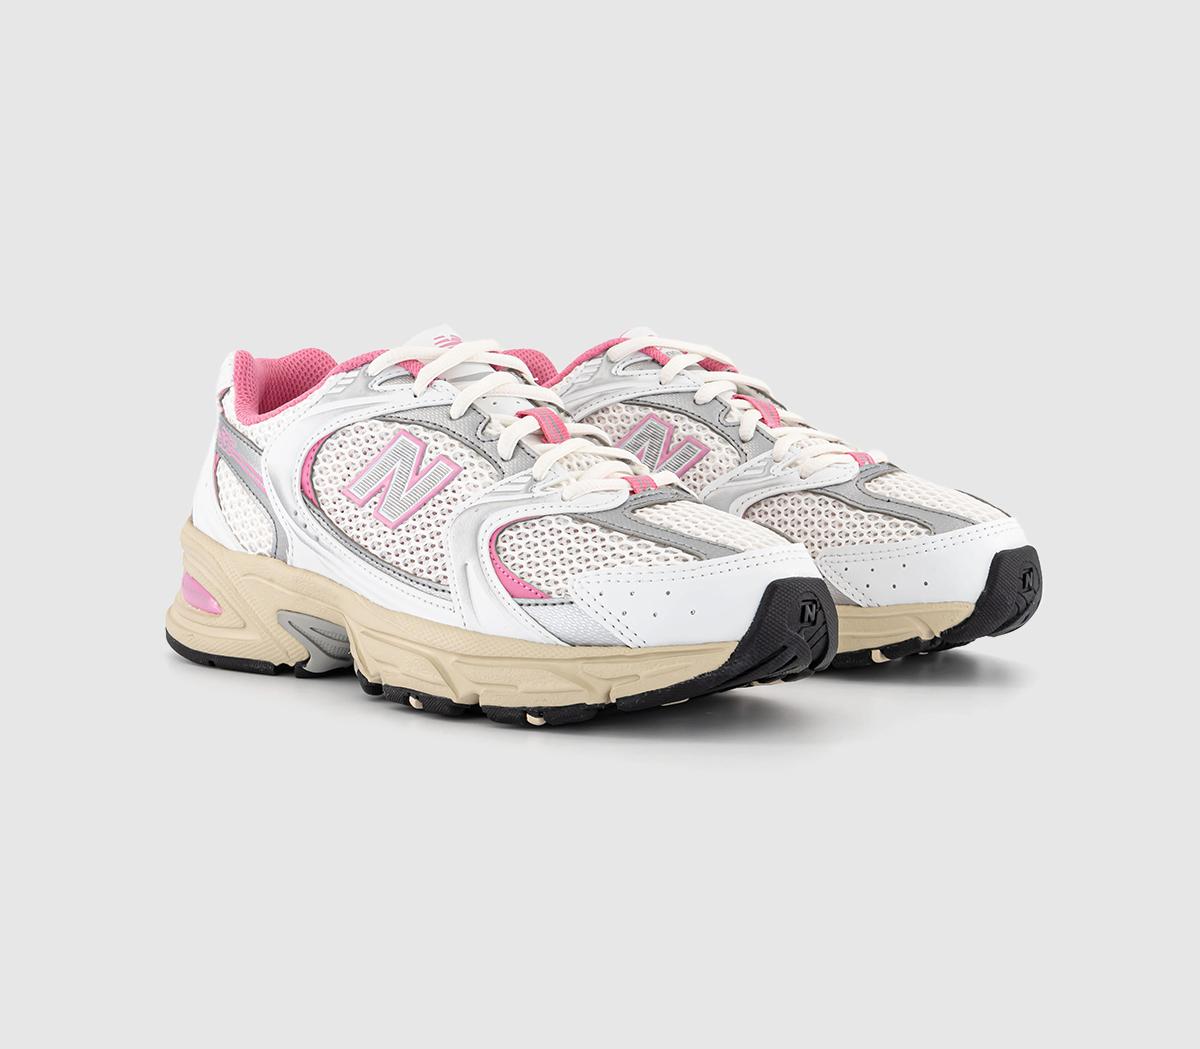 New Balance Womens Mr530 Trainers Off White Pink Silver, 7.5